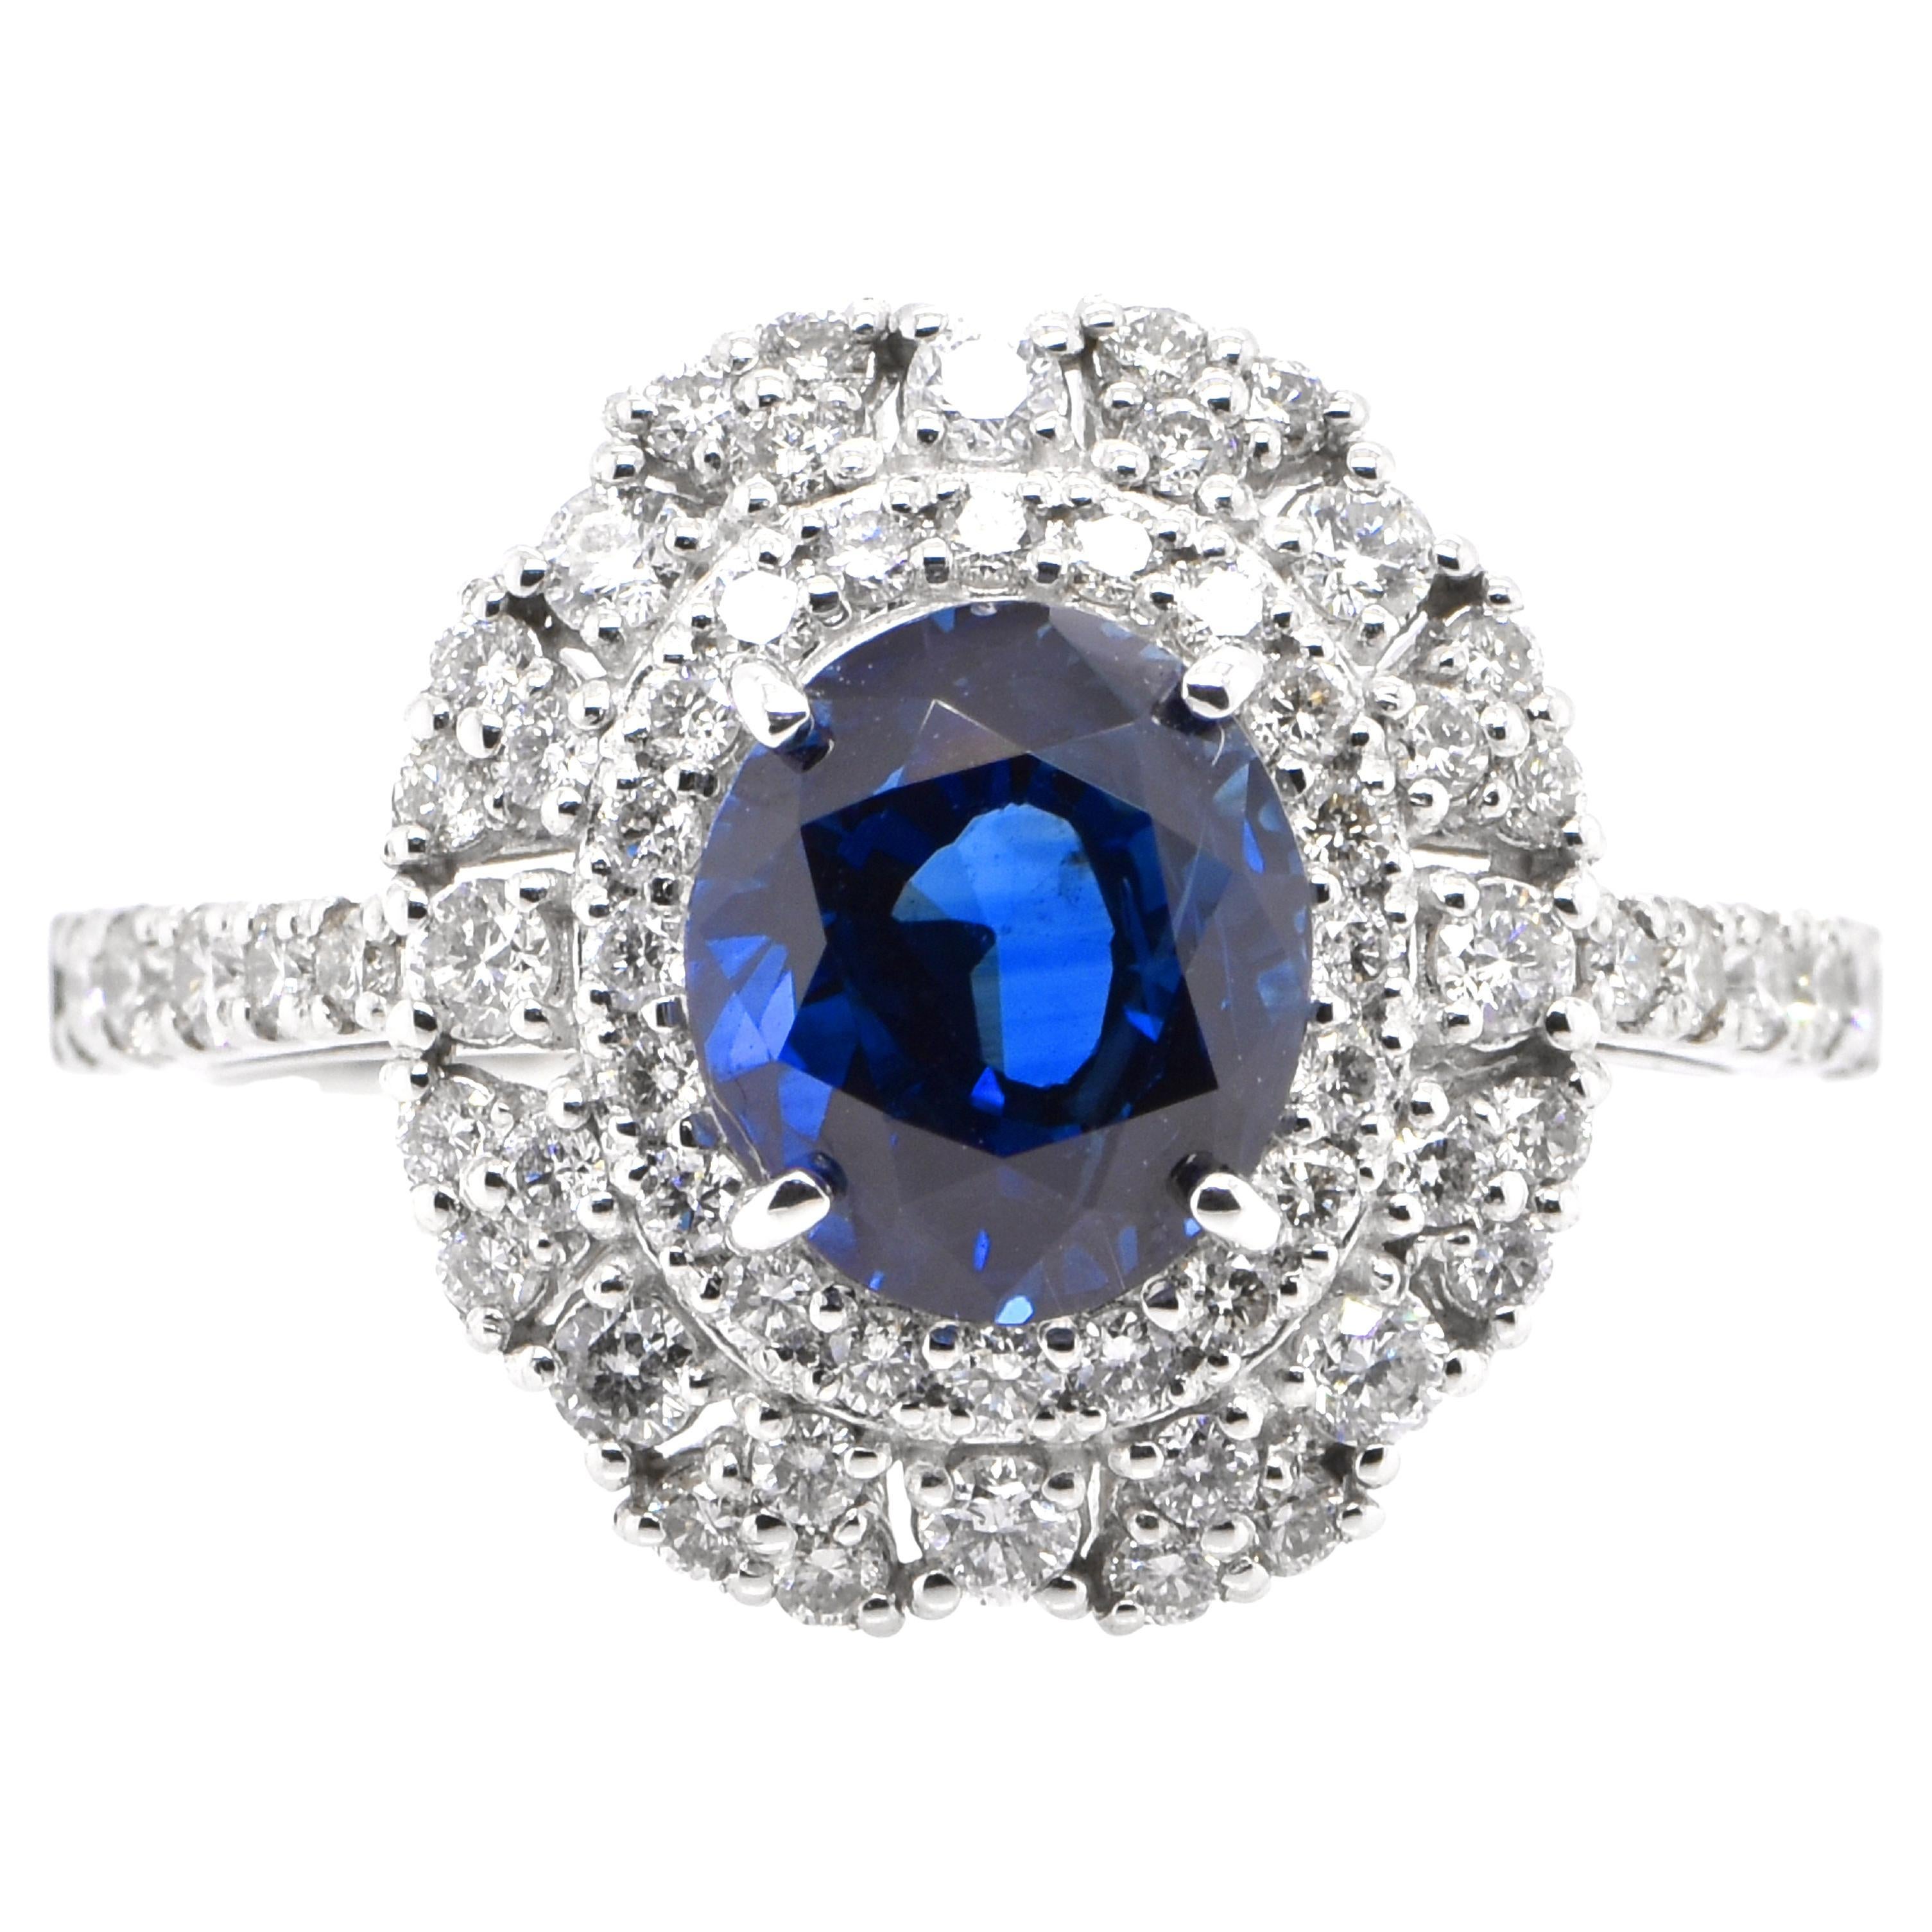 AIGS Certified 2.32 Carat Natural, Royal Blue Sapphire Ring Set in Platinum For Sale